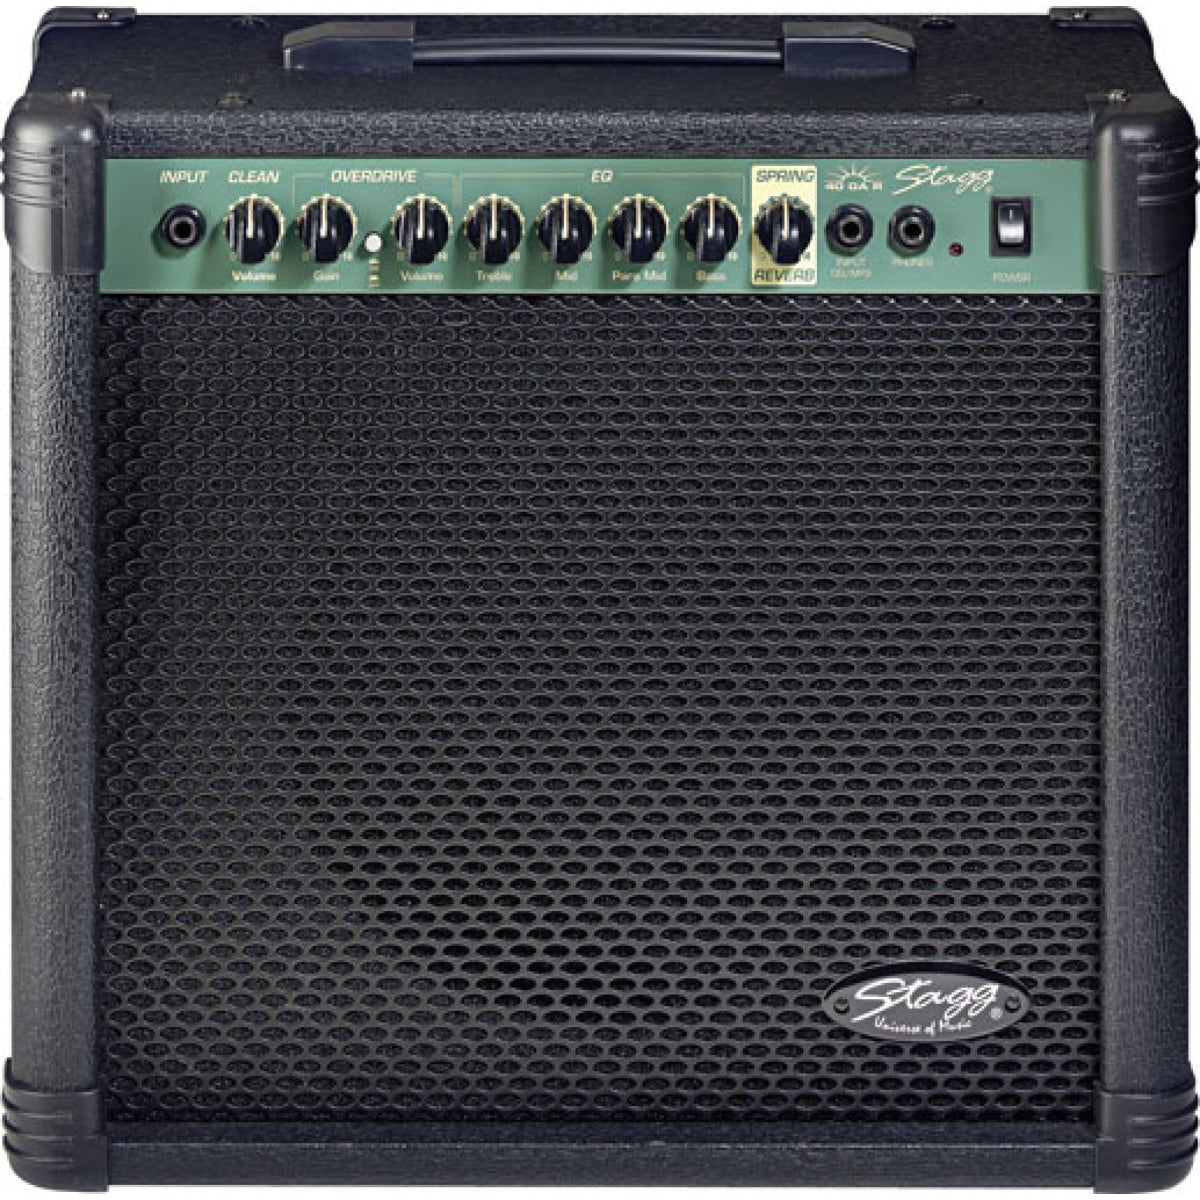 40 GA R Guitar Amplifier 40w With Spring Reverb